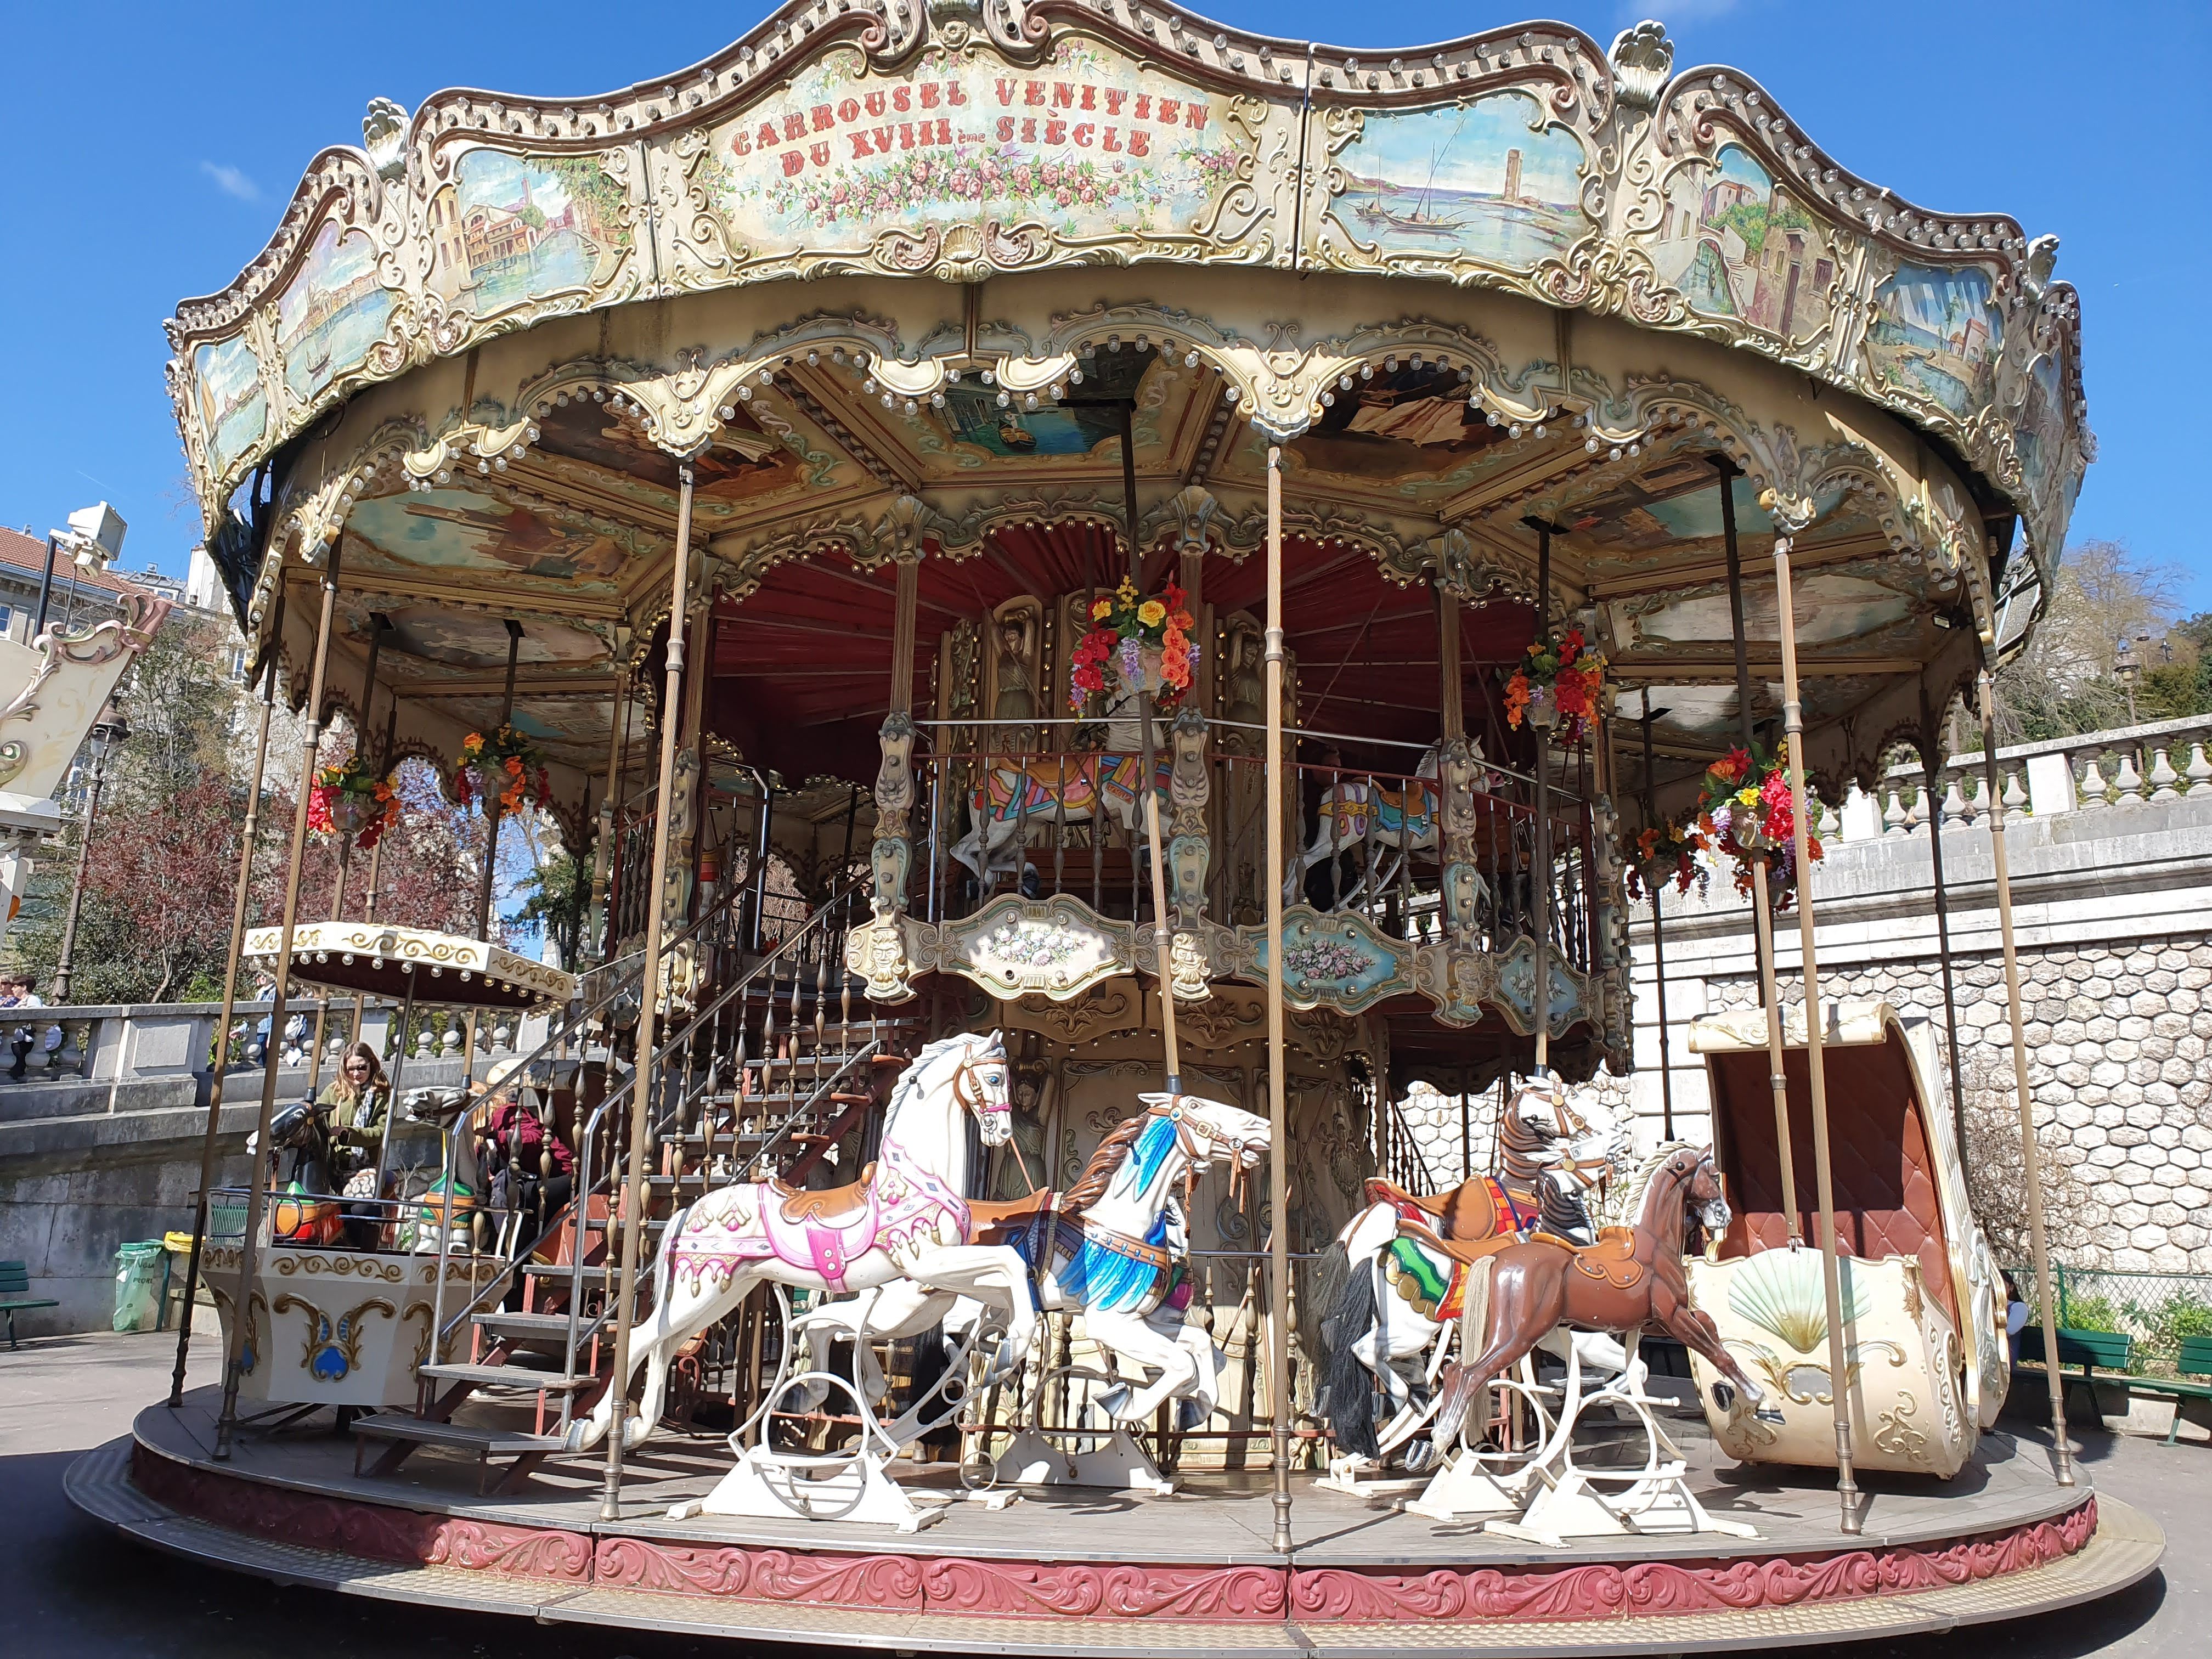 You can still have a ride on the Carousel.